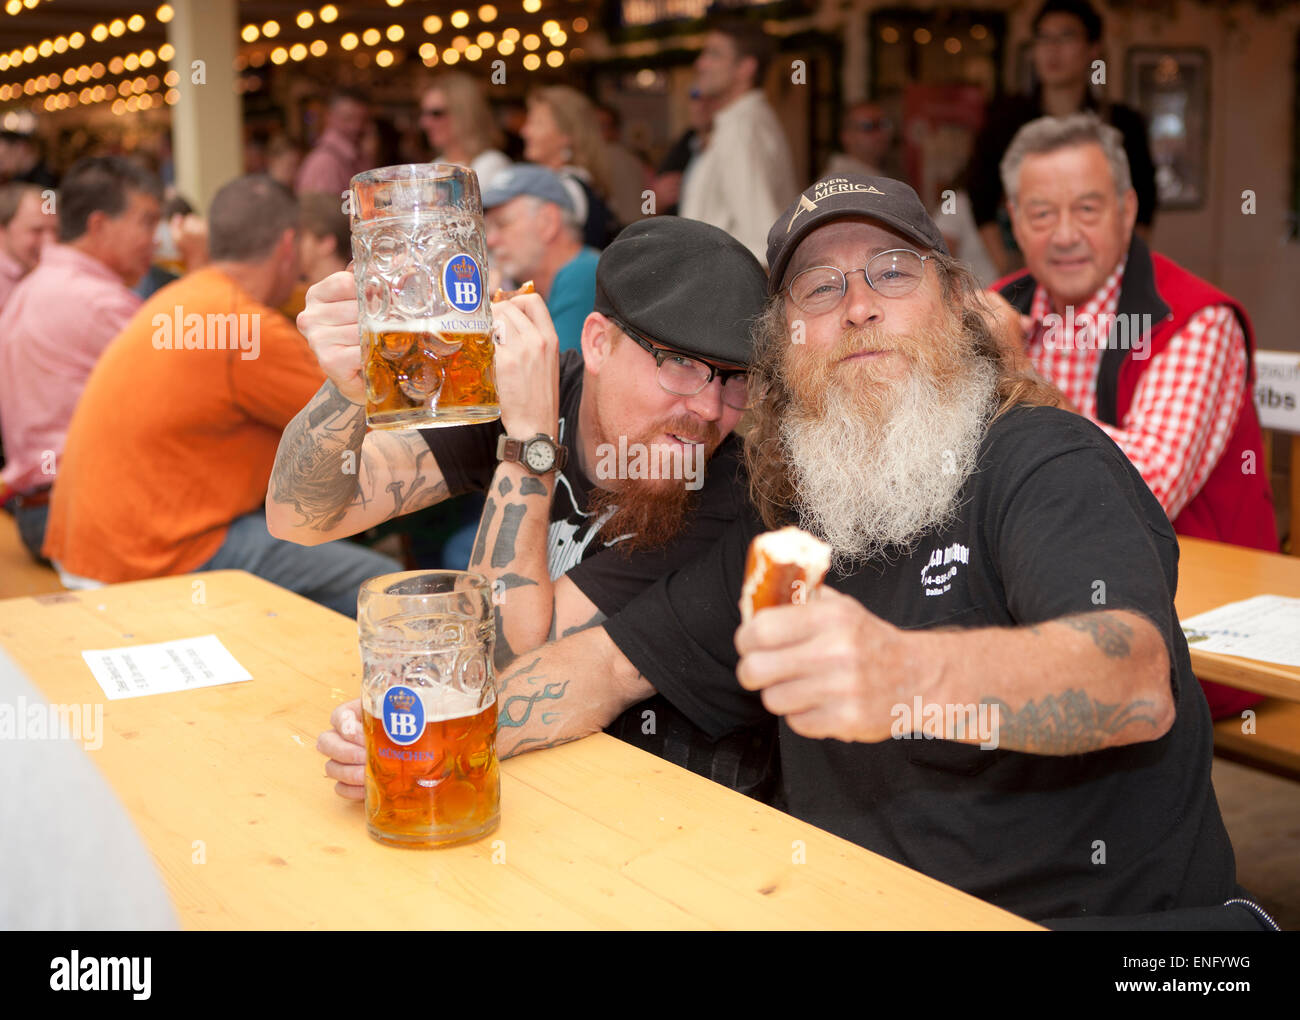 Visitors sit in the beer tent at the Oktoberfest with a beer mug Stock Photo